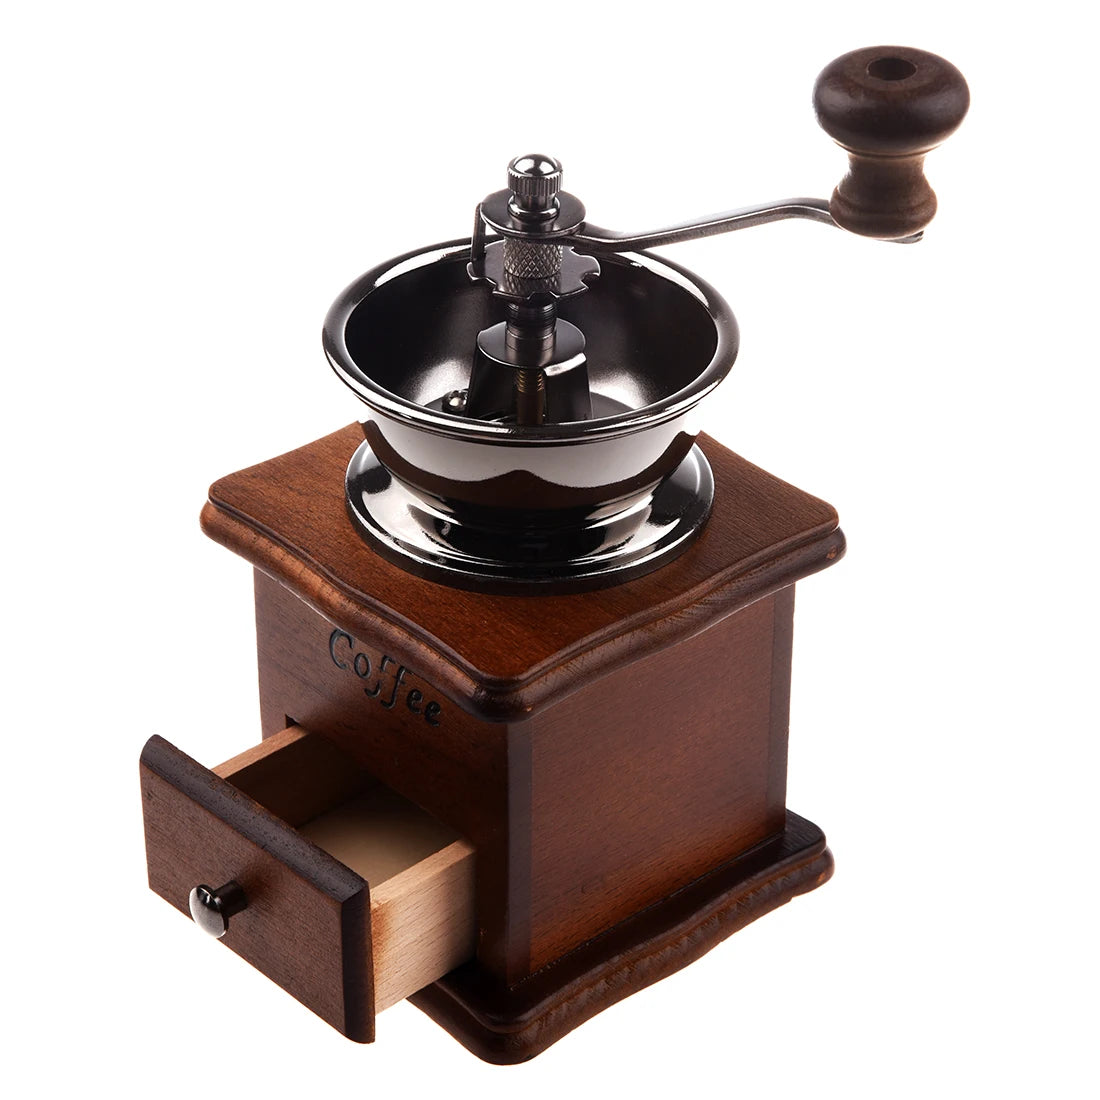 Manual coffee grinder Wood / metal hand mill Spice mill (wood color)